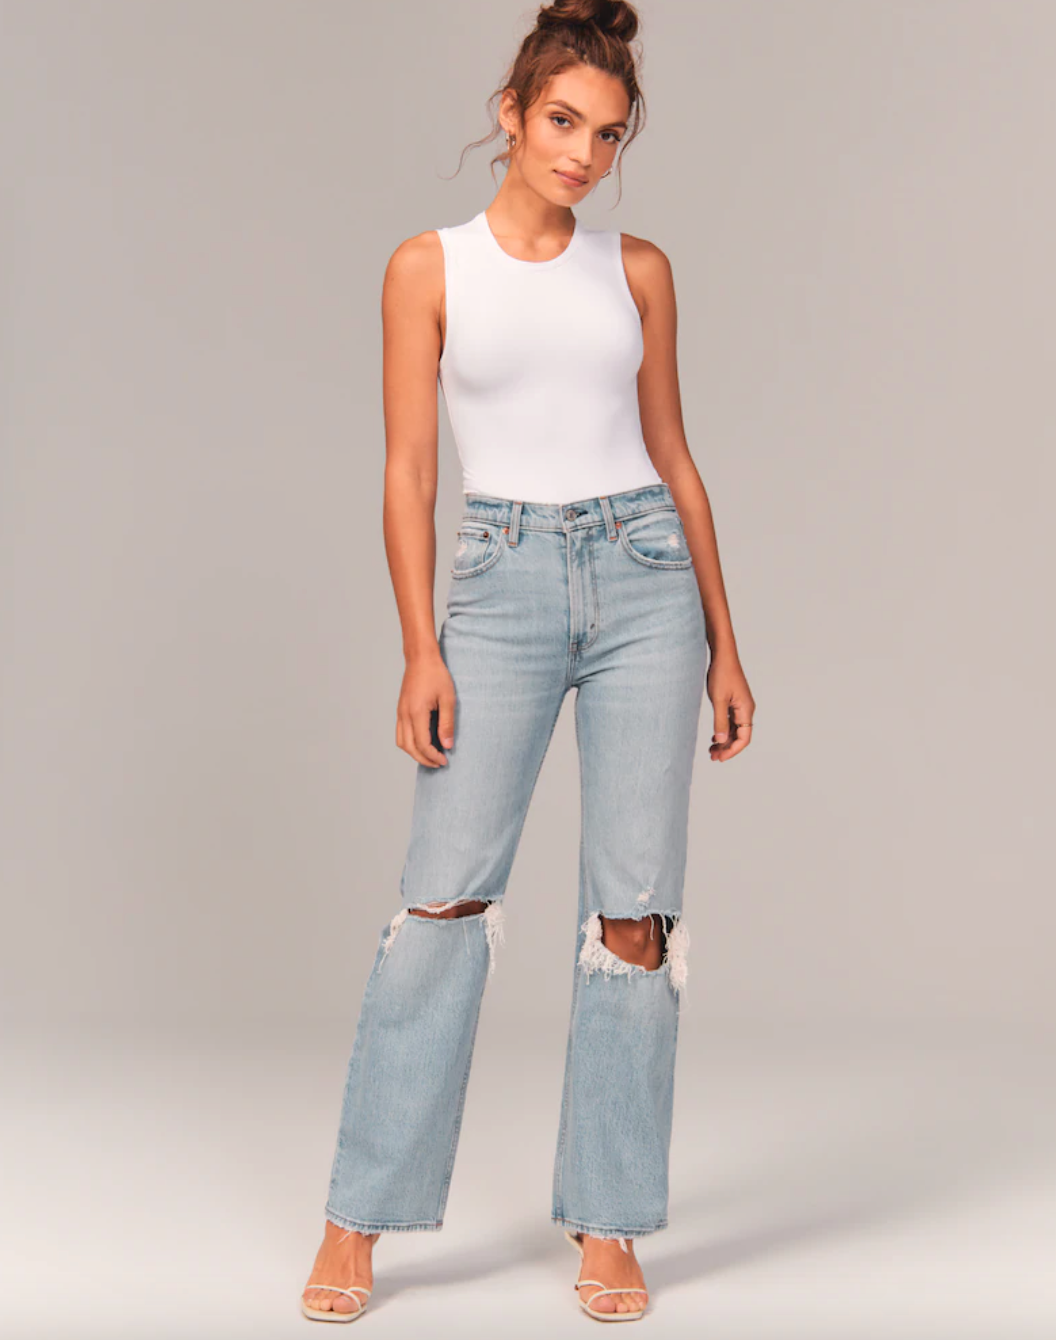 The Best Jeans For Tall Girls — Autum Love